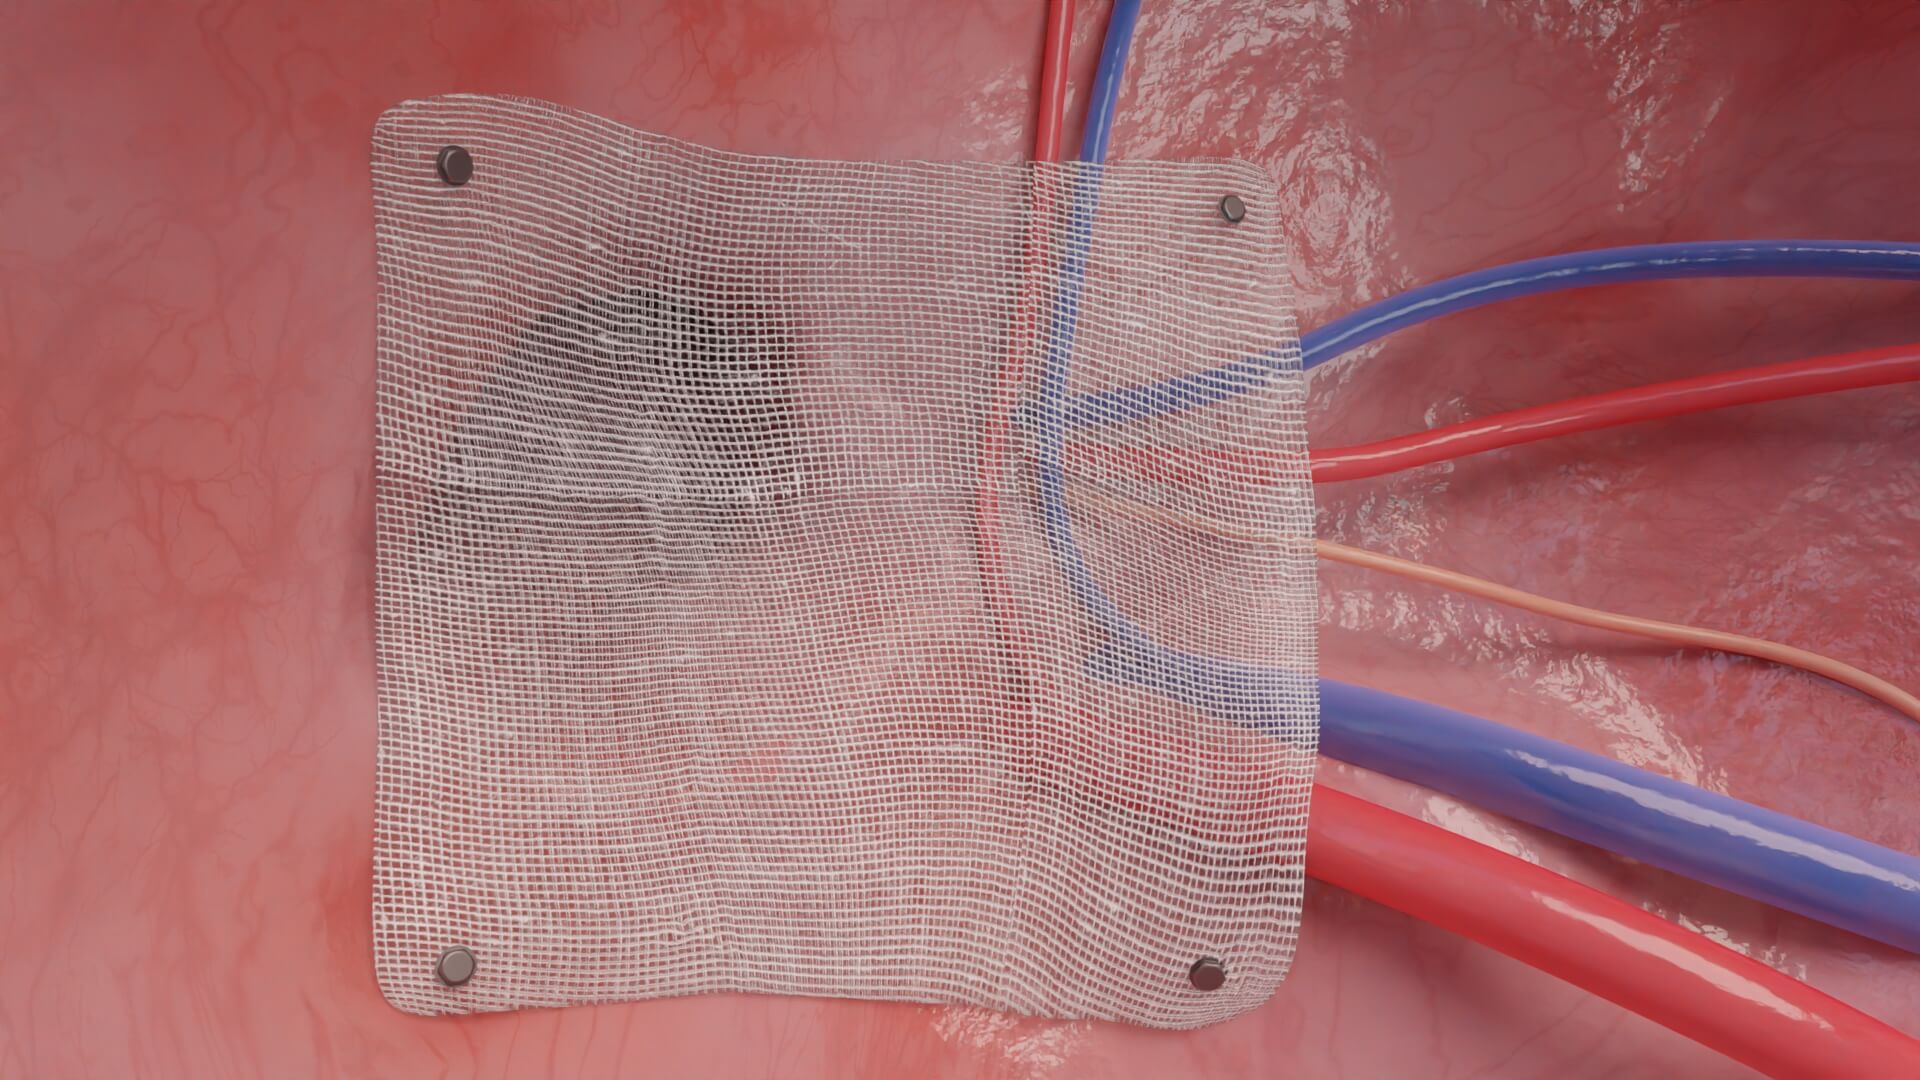 This is an image of a mesh used in hernia repair.